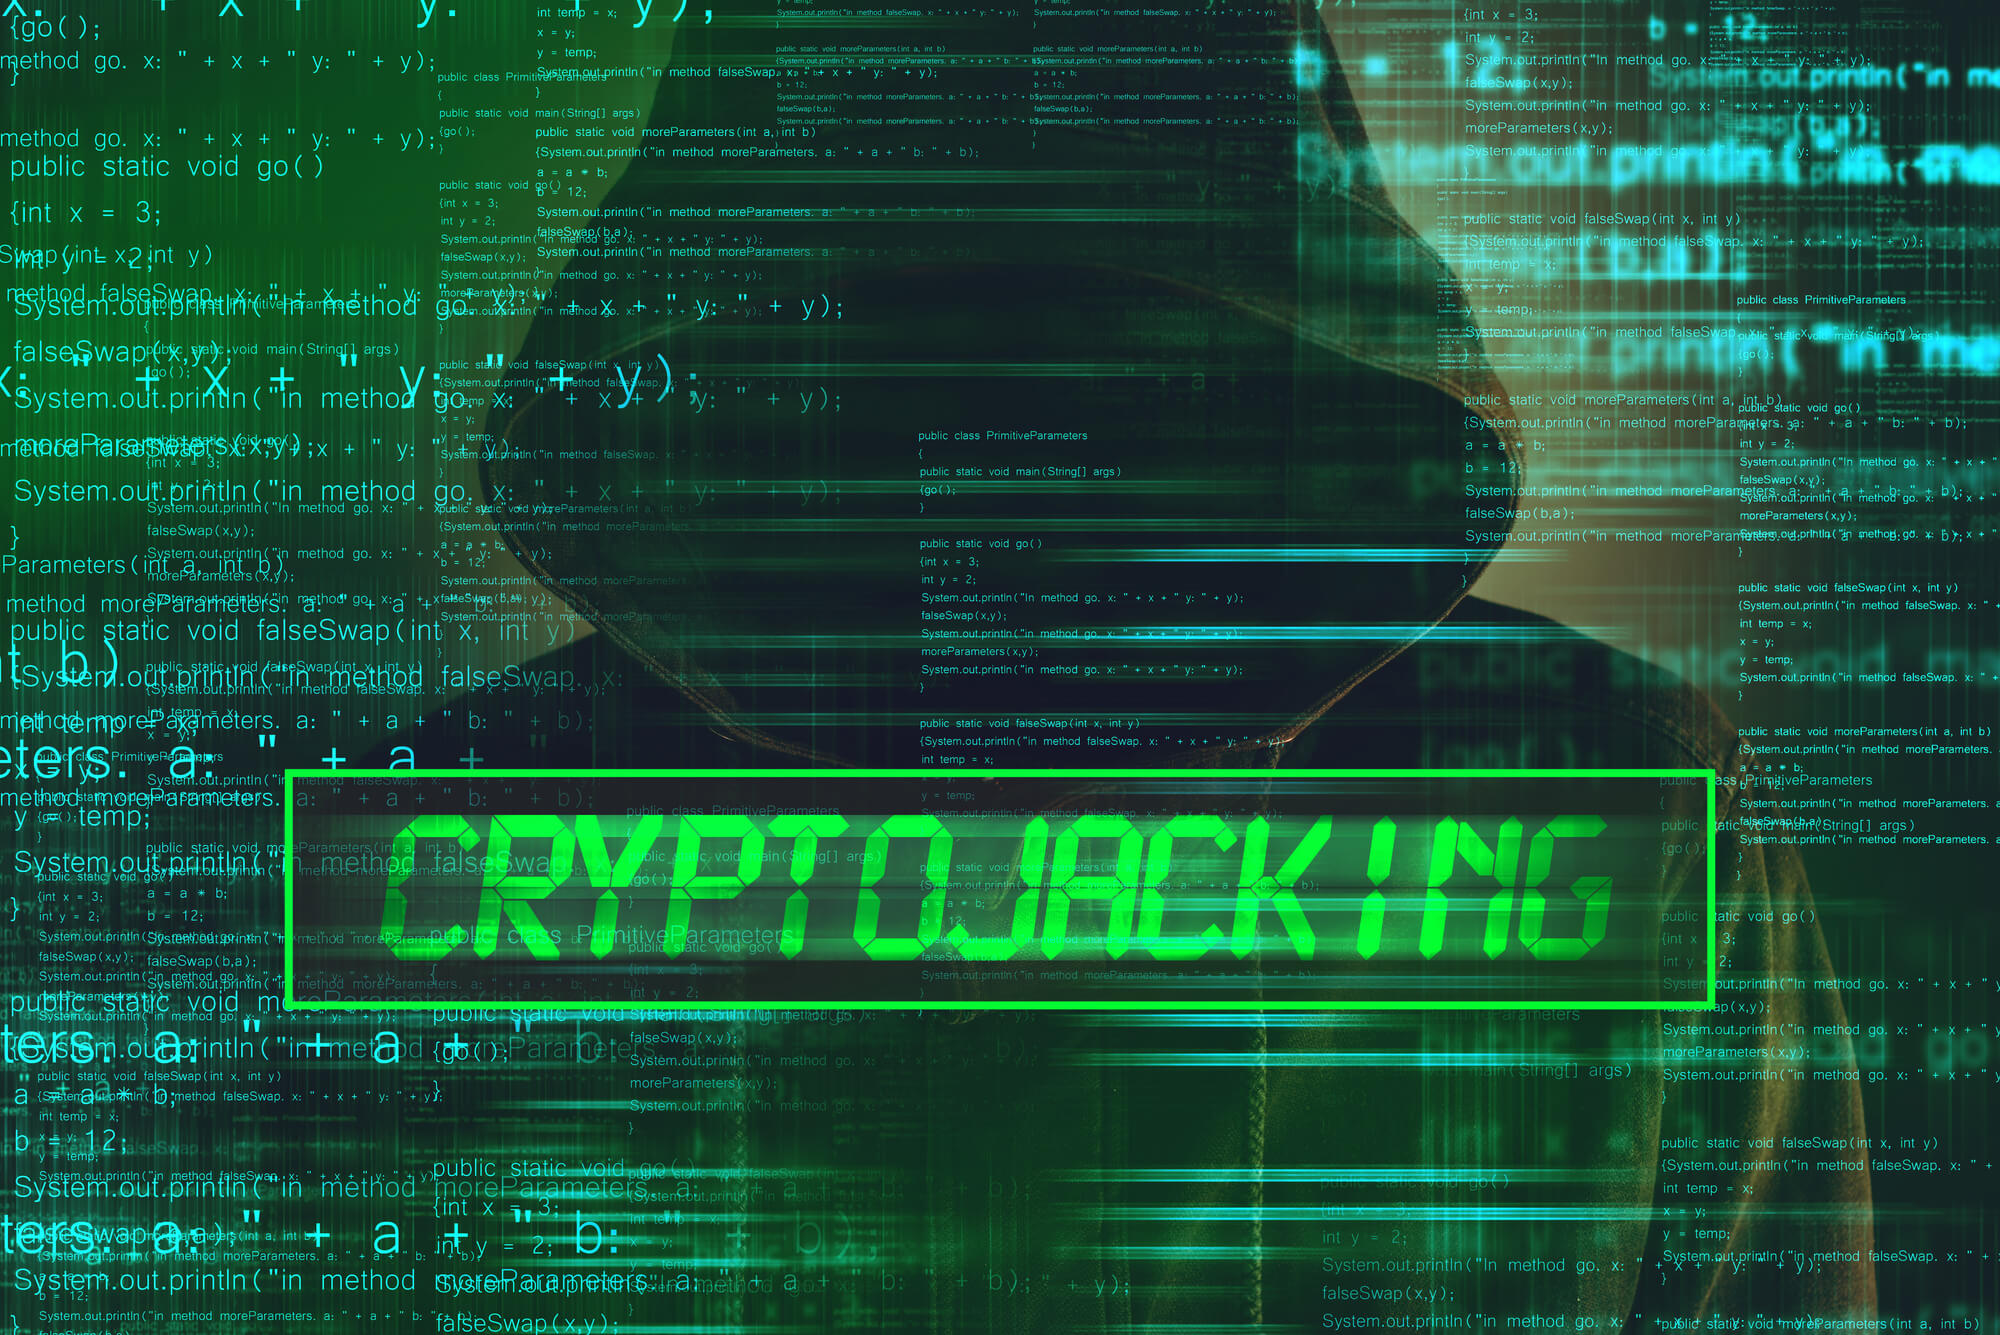 Kaspersky warning about botnets increasingly being used for crypto mining malware